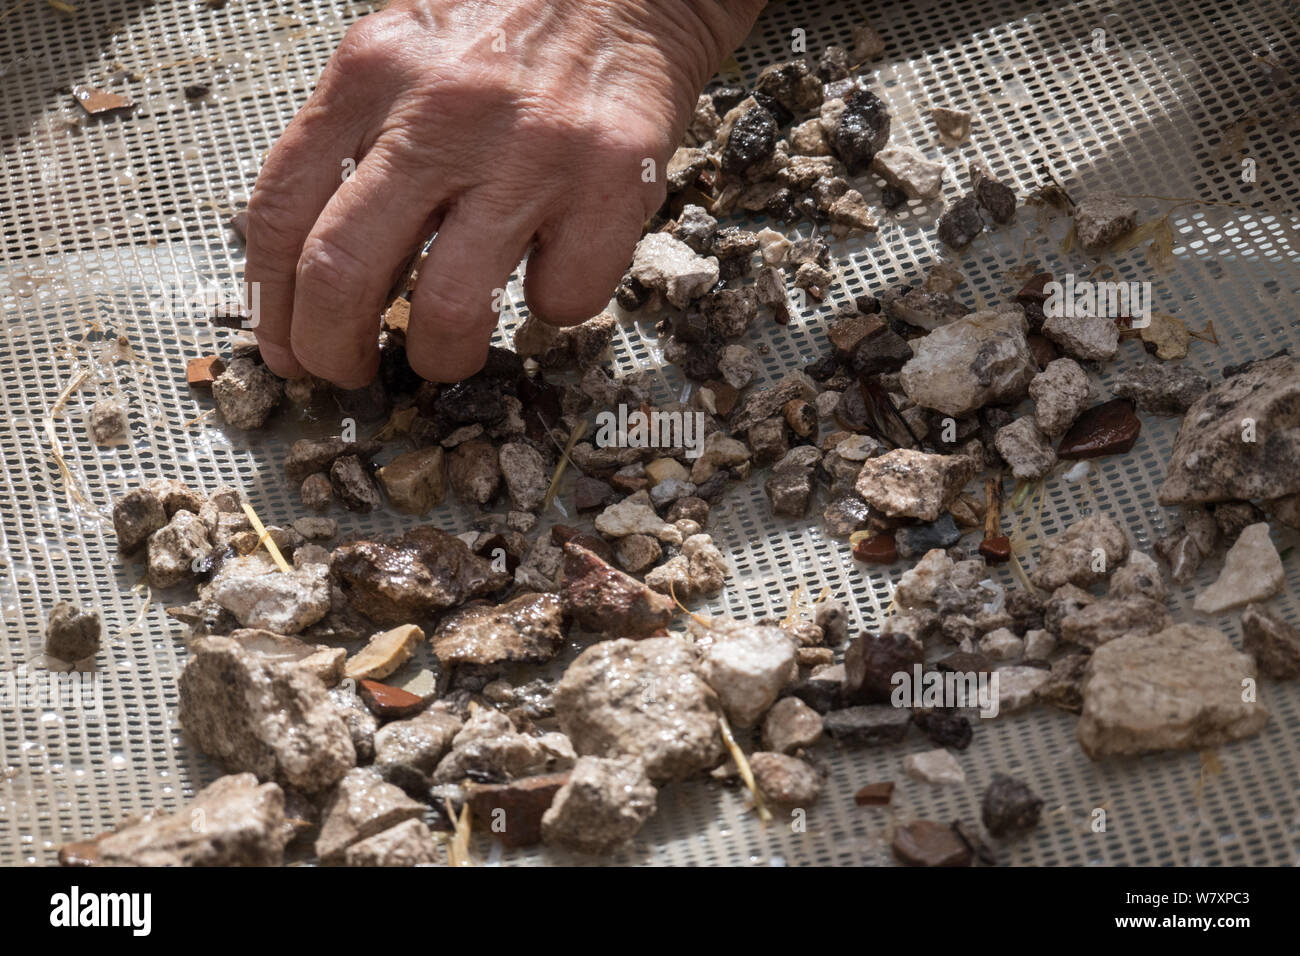 Jerusalem, Israel. 7th August, 2019. Visitors get first hand experience at the Emek Tzurim Temple Mount Sifting Project sifting through debris dug up by the Muslim Waqf on Temple Mount and dumped in the Kidron Valley. Numerous Second Temple archaeological remains have been discovered. Archaeologists accuse the Waqf of engaging in illegally destroying remains of Jewish buildings and artifacts in a deliberate attempt to erase historic Jewish links to the Temple Mount. Religious Jews are in the midst of observing the 'Three Weeks' or 'Bein HaMetzarim', a period of mourning over the destruction of Stock Photo